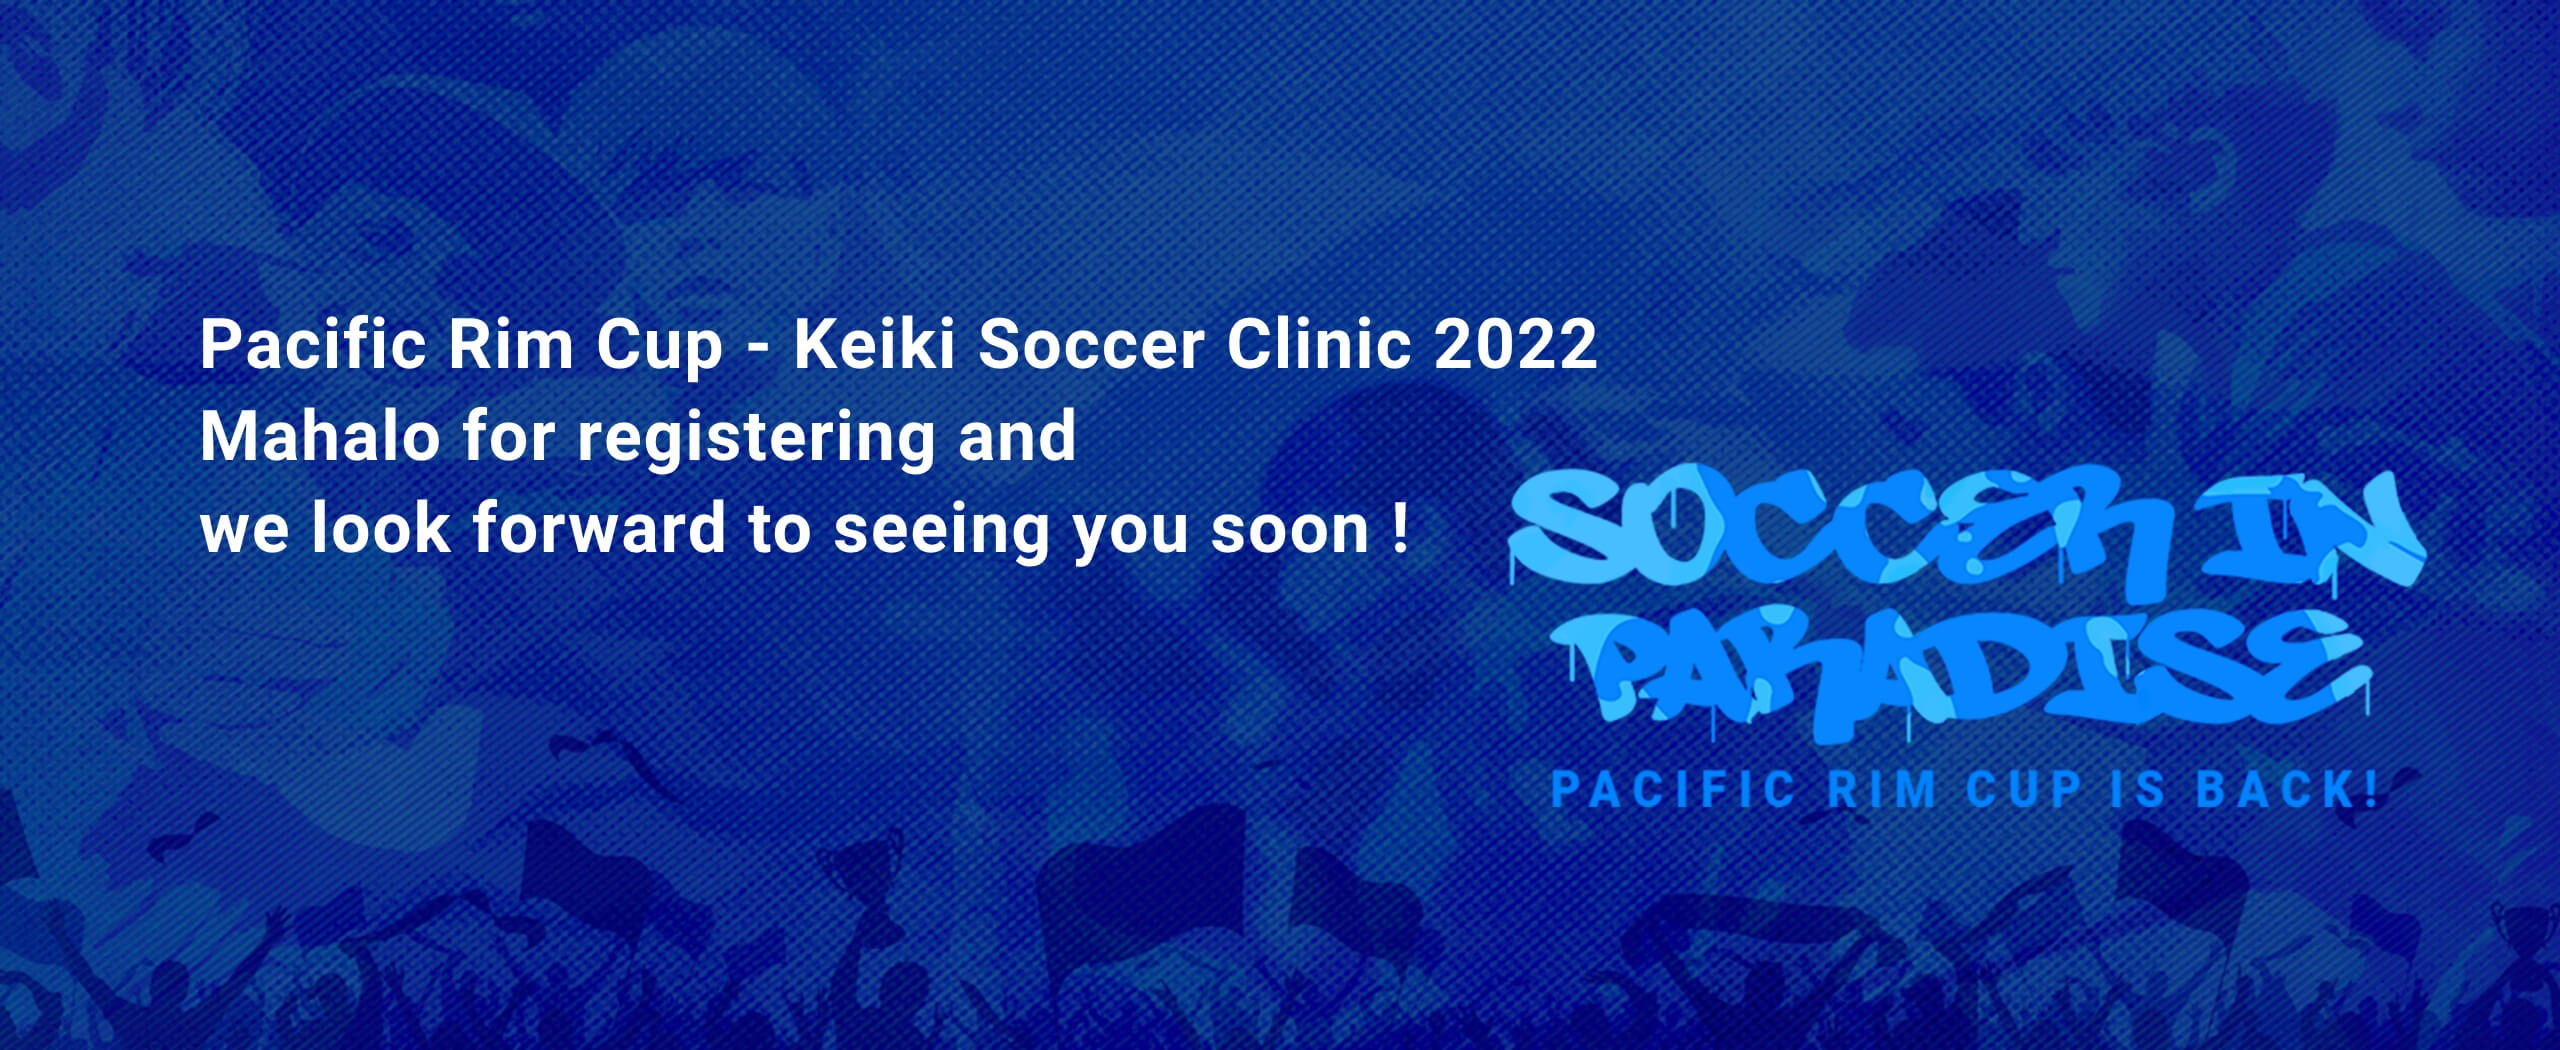 Pacific Rim Cup - Keiki Soccer Clinic 2022 Mahalo for registering and we look forward to seeing you soon !